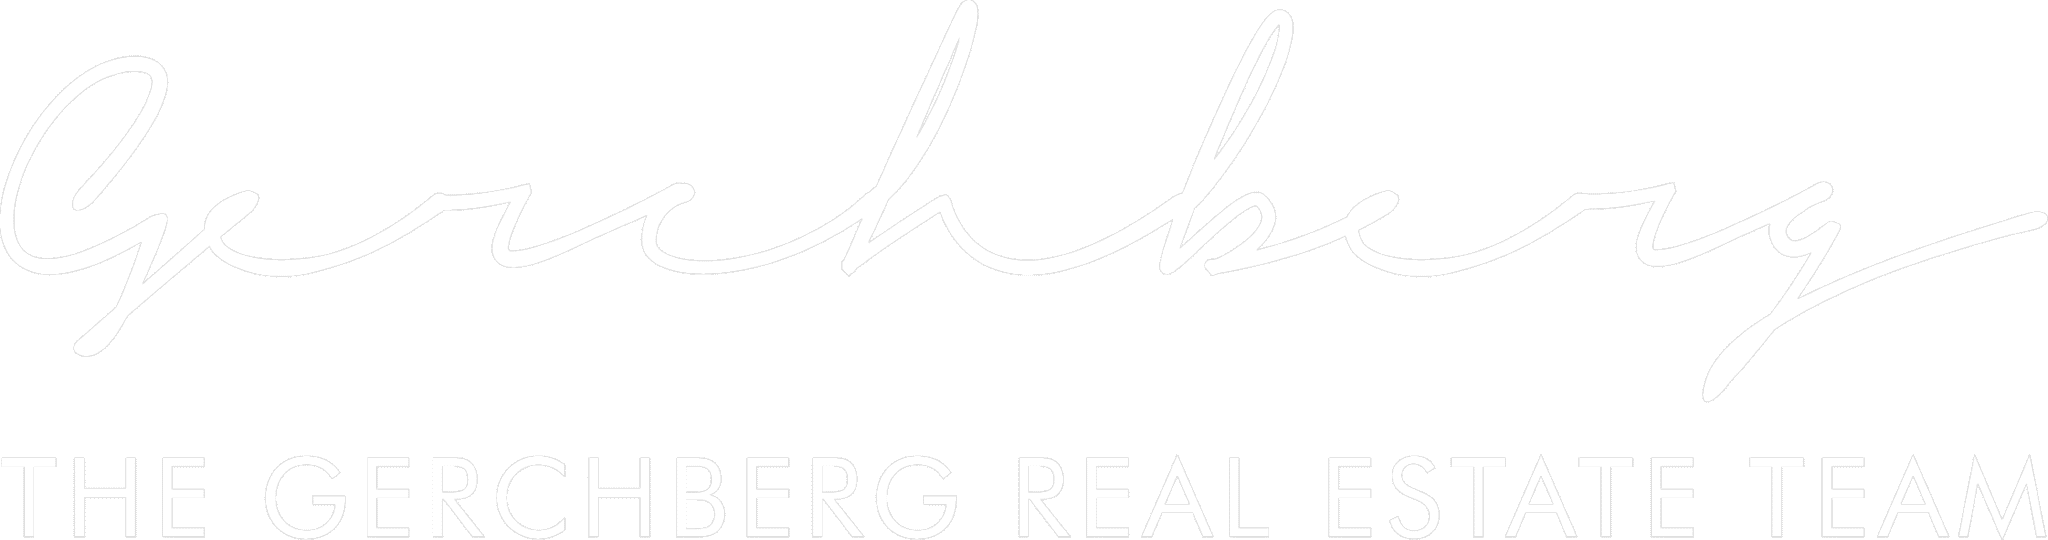 The Gerchberg Real Estate Team The Gerchberg Real Estate Team